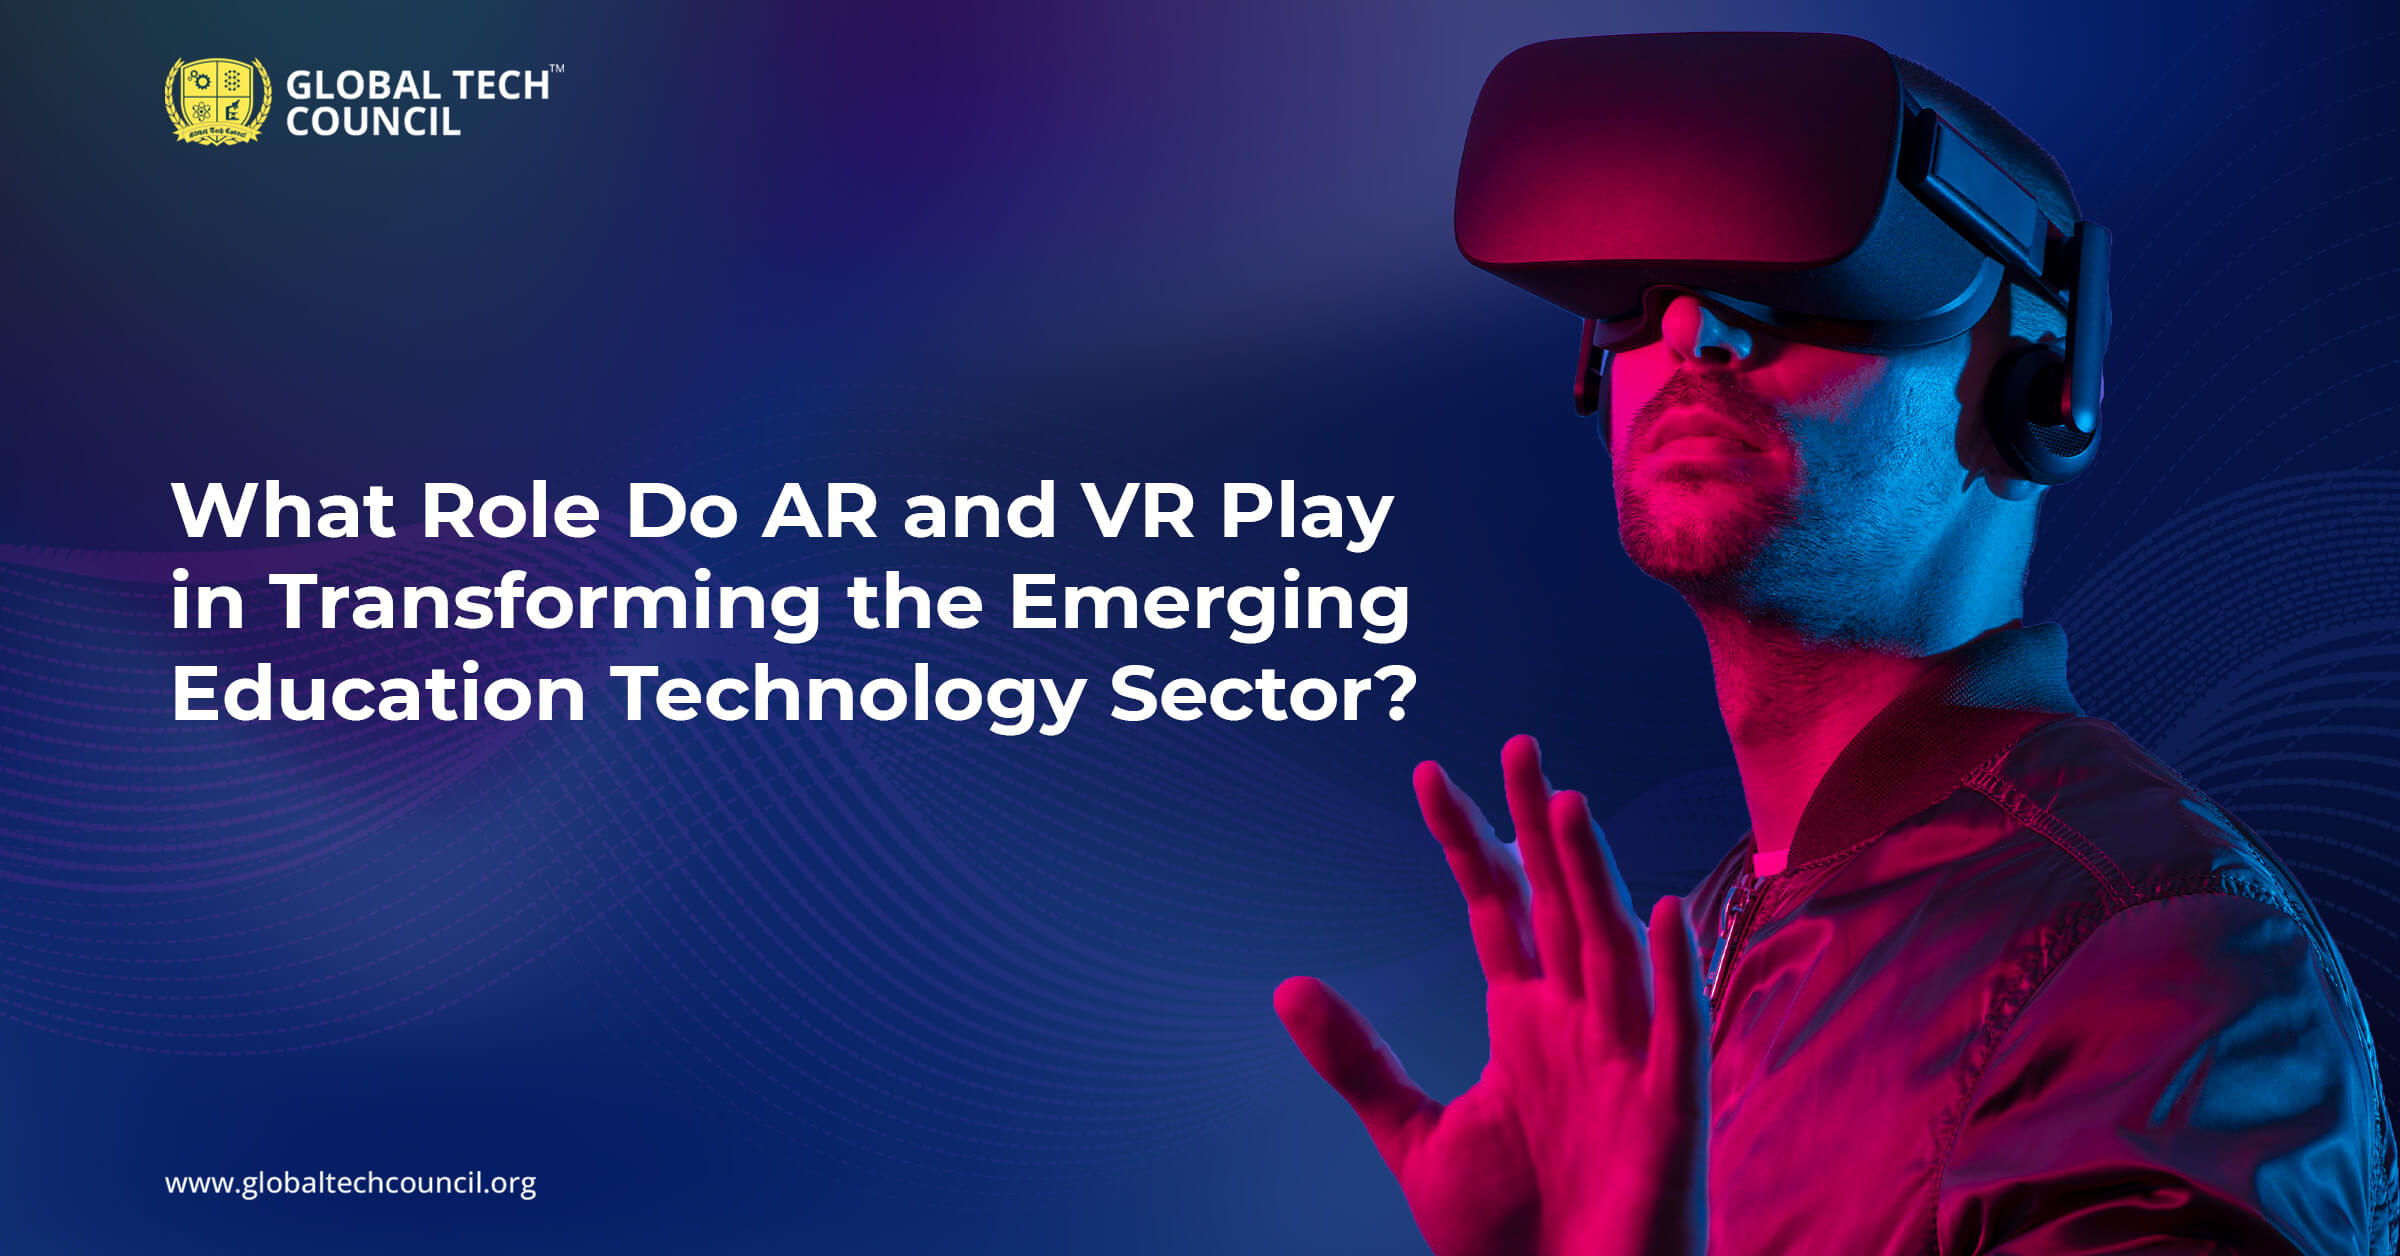 What Role Do AR and VR Play in Transforming the Emerging Education Technology Sector